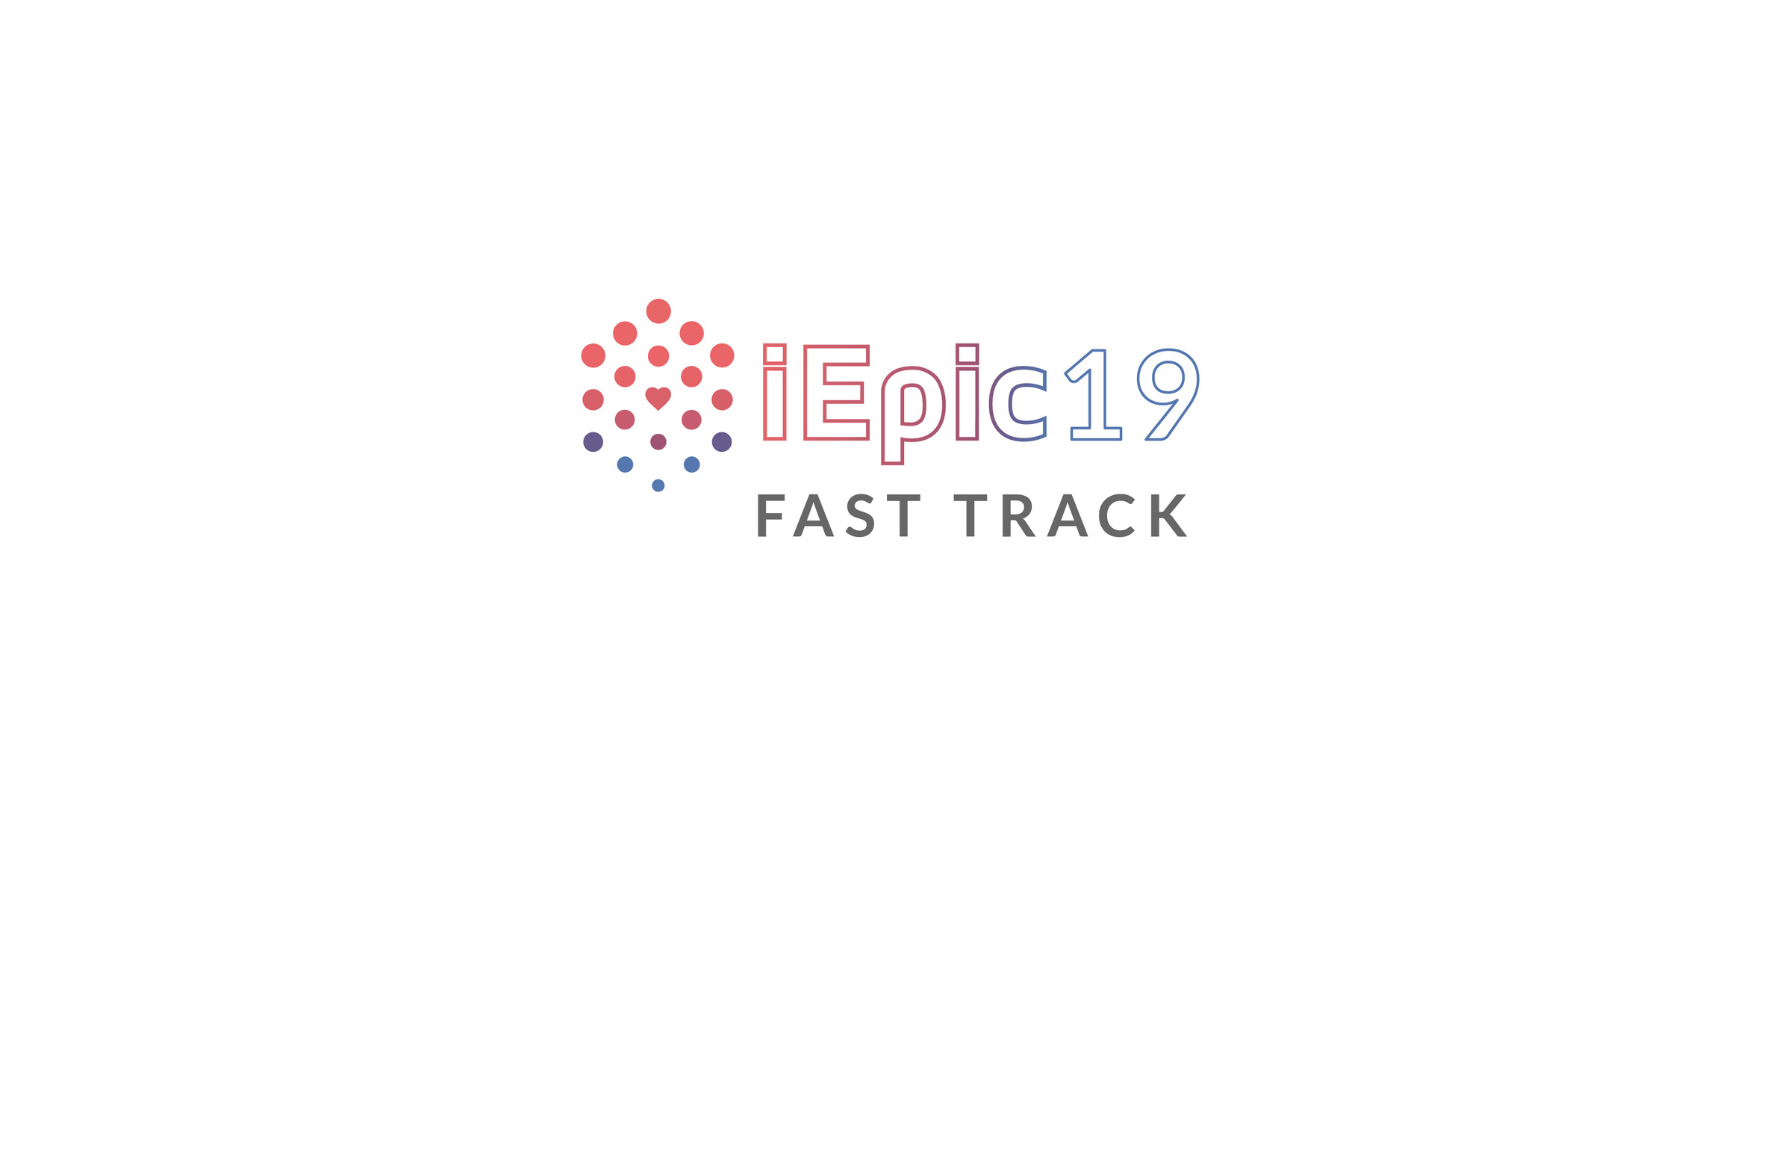 FAST TRACK EPIC19